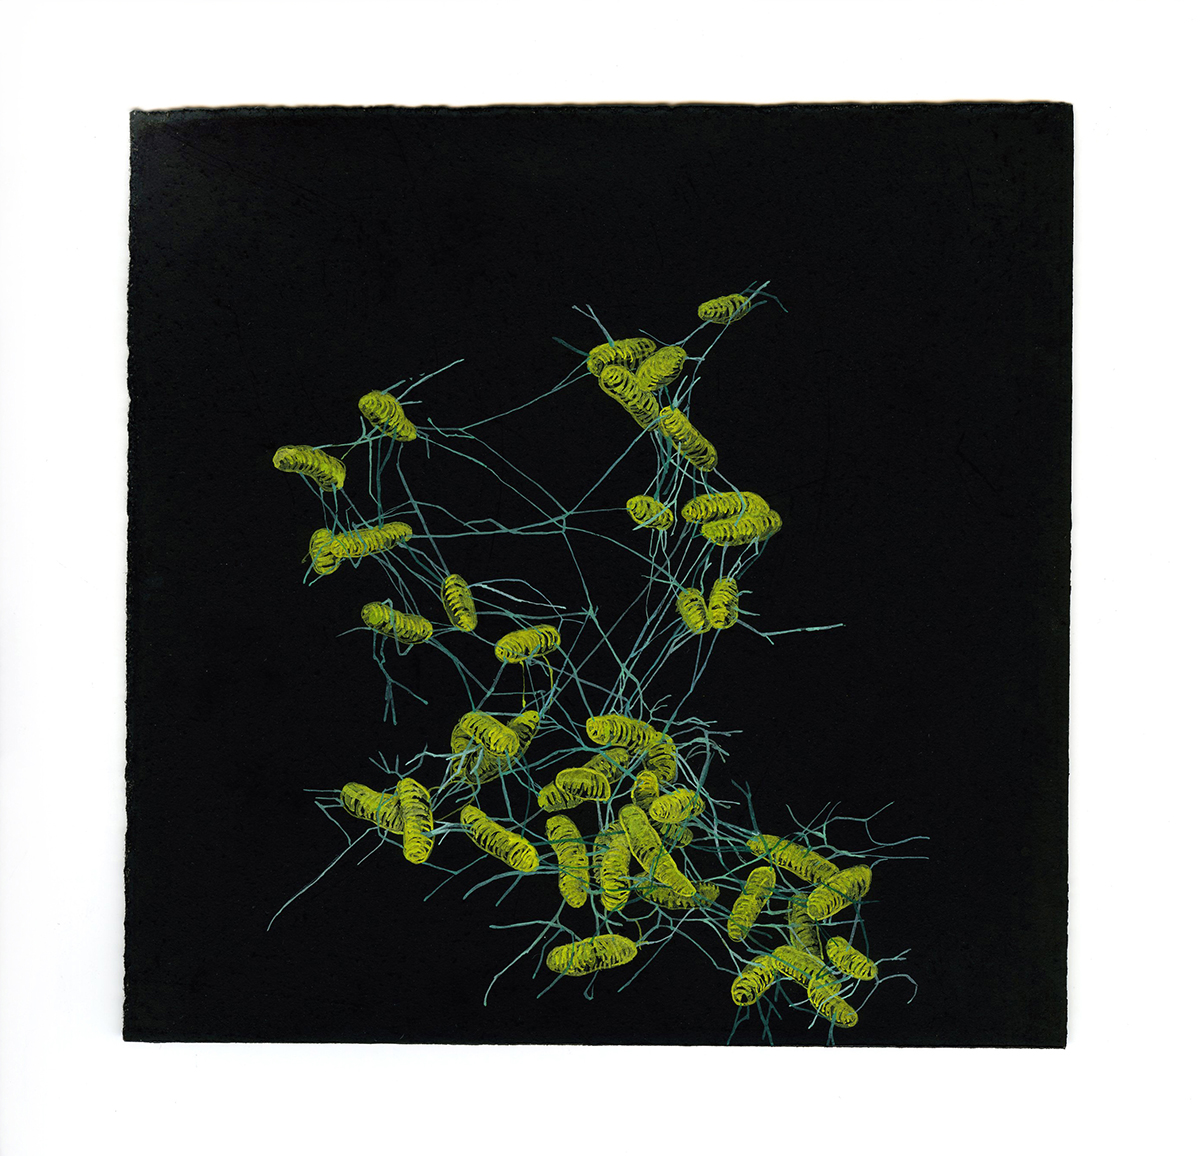 Salmonella Study 3, 2007-08, pastel, gouache and ink on paper, 6 x 6 inches